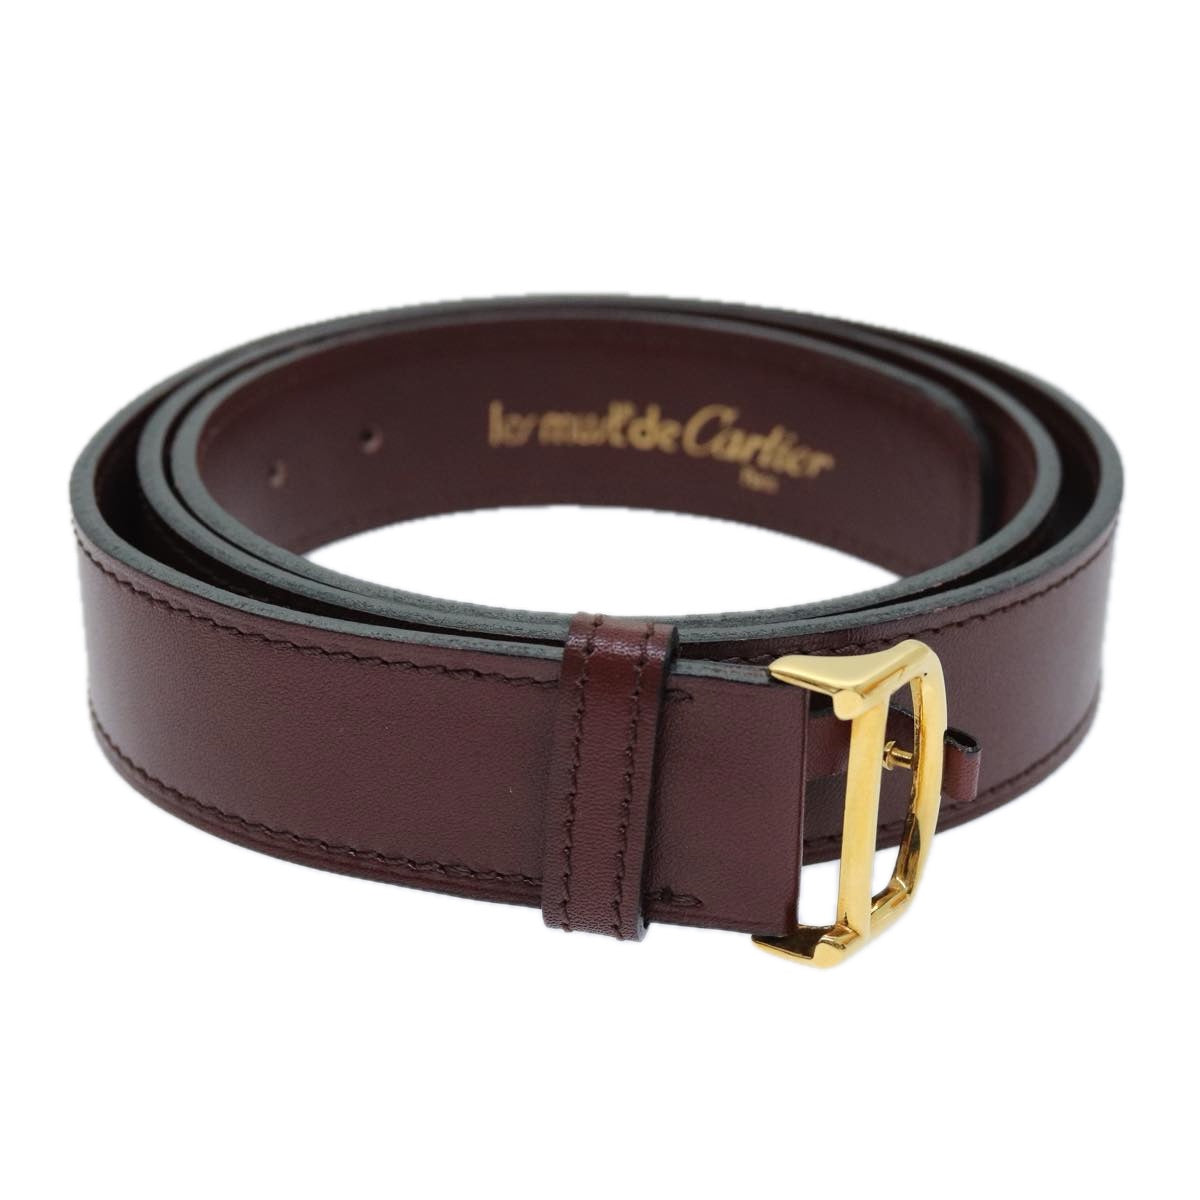 CARTIER Belt Leather 39.8"" Red Auth am6240 - 0